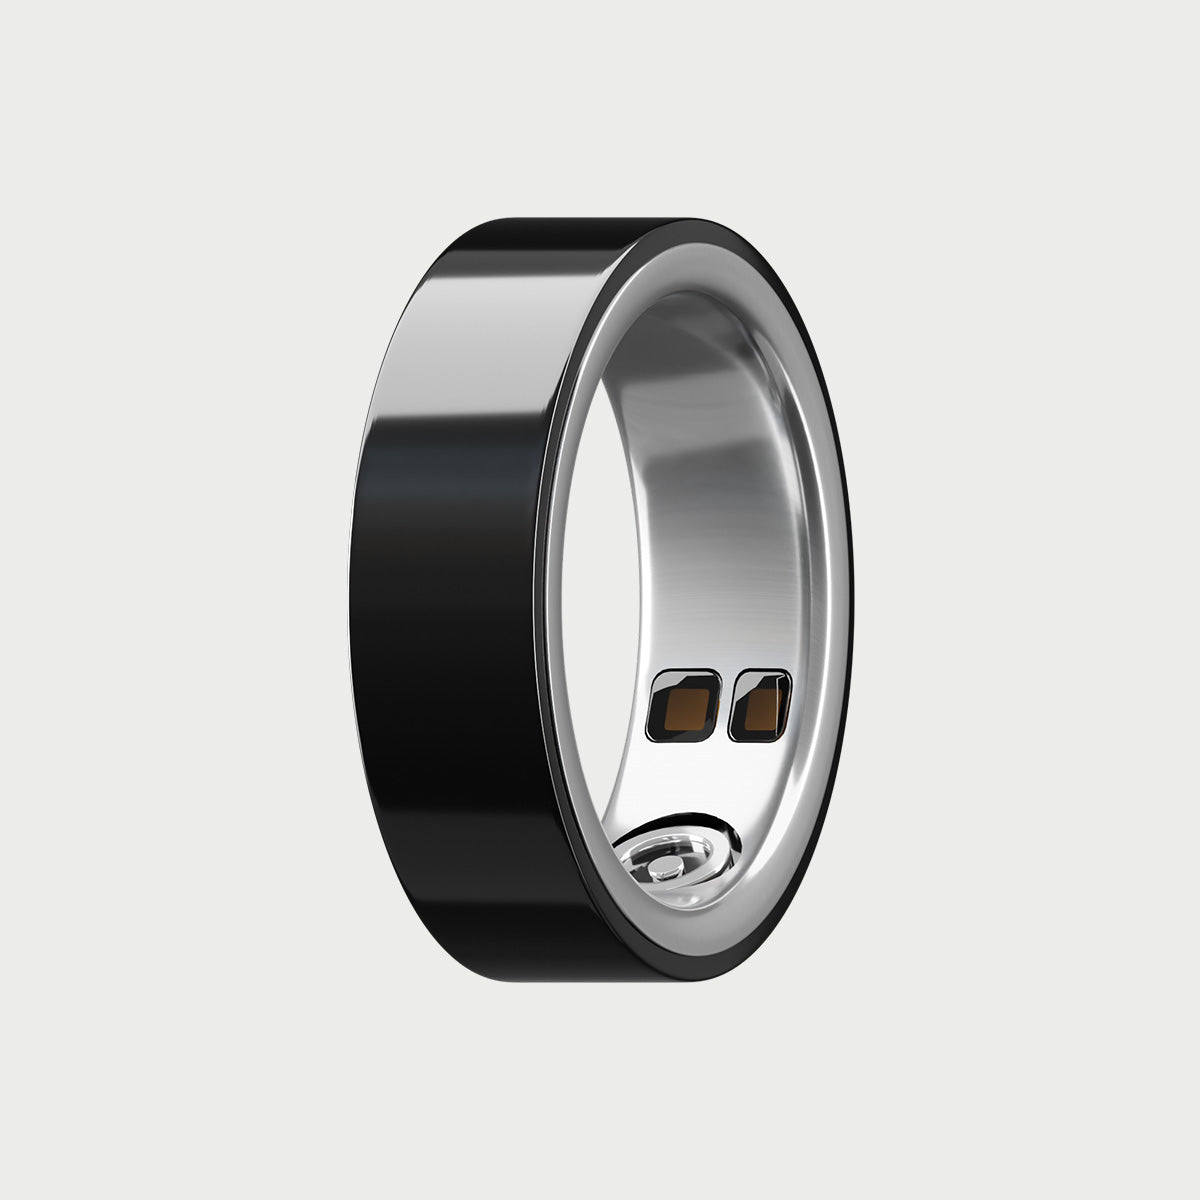 Yeyro Pro - Track Your Health & Fitness Form Your Finger | Buy Now!